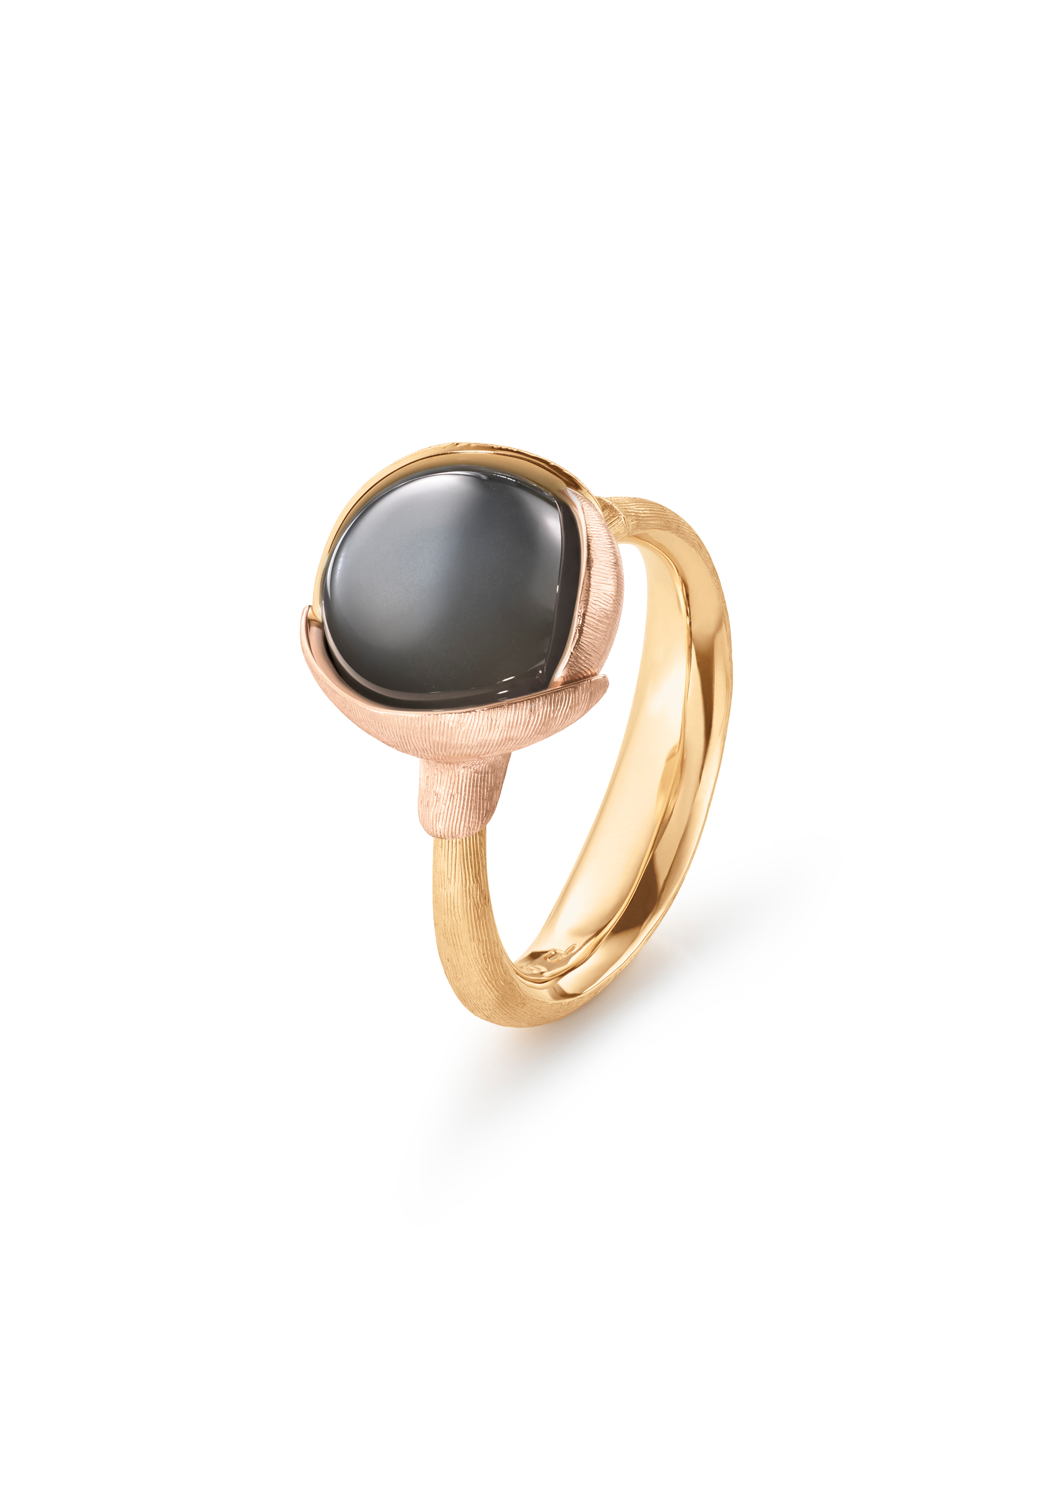 Buy Black Moonstone Ring New Moon Ring Solid Sterling Silver Stacking Ring  Witchy Jewelry Any Size Online in India - Etsy